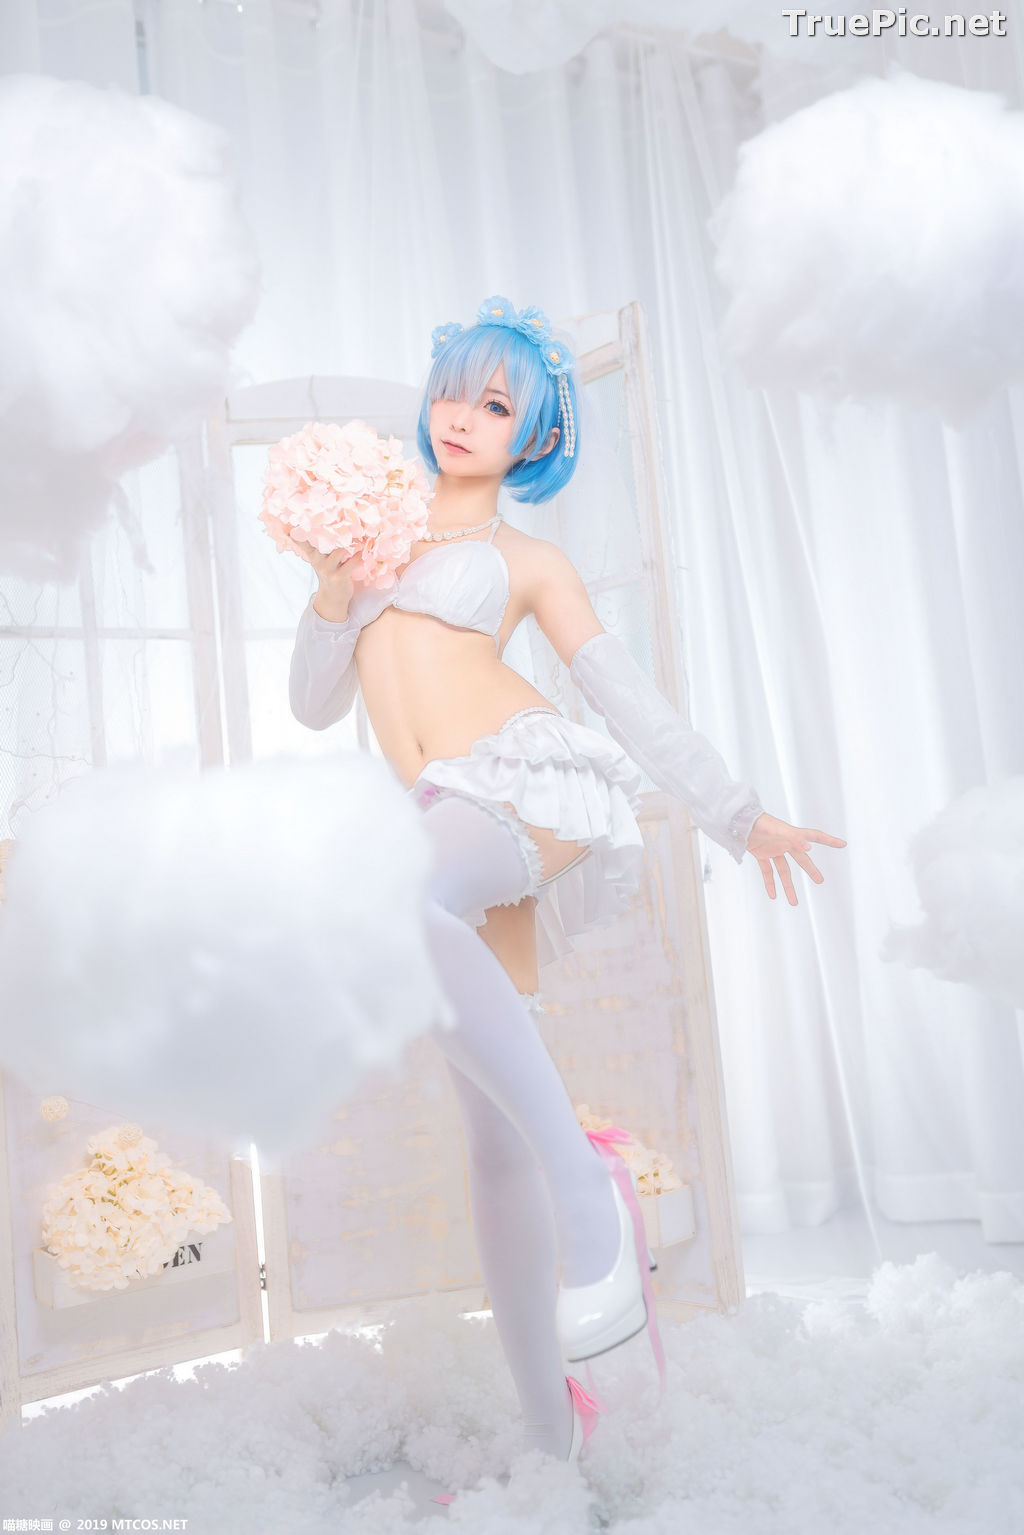 Image [MTCos] 喵糖映画 Vol.029 – Chinese Cute Model – Bride Rem Cosplay - TruePic.net - Picture-13